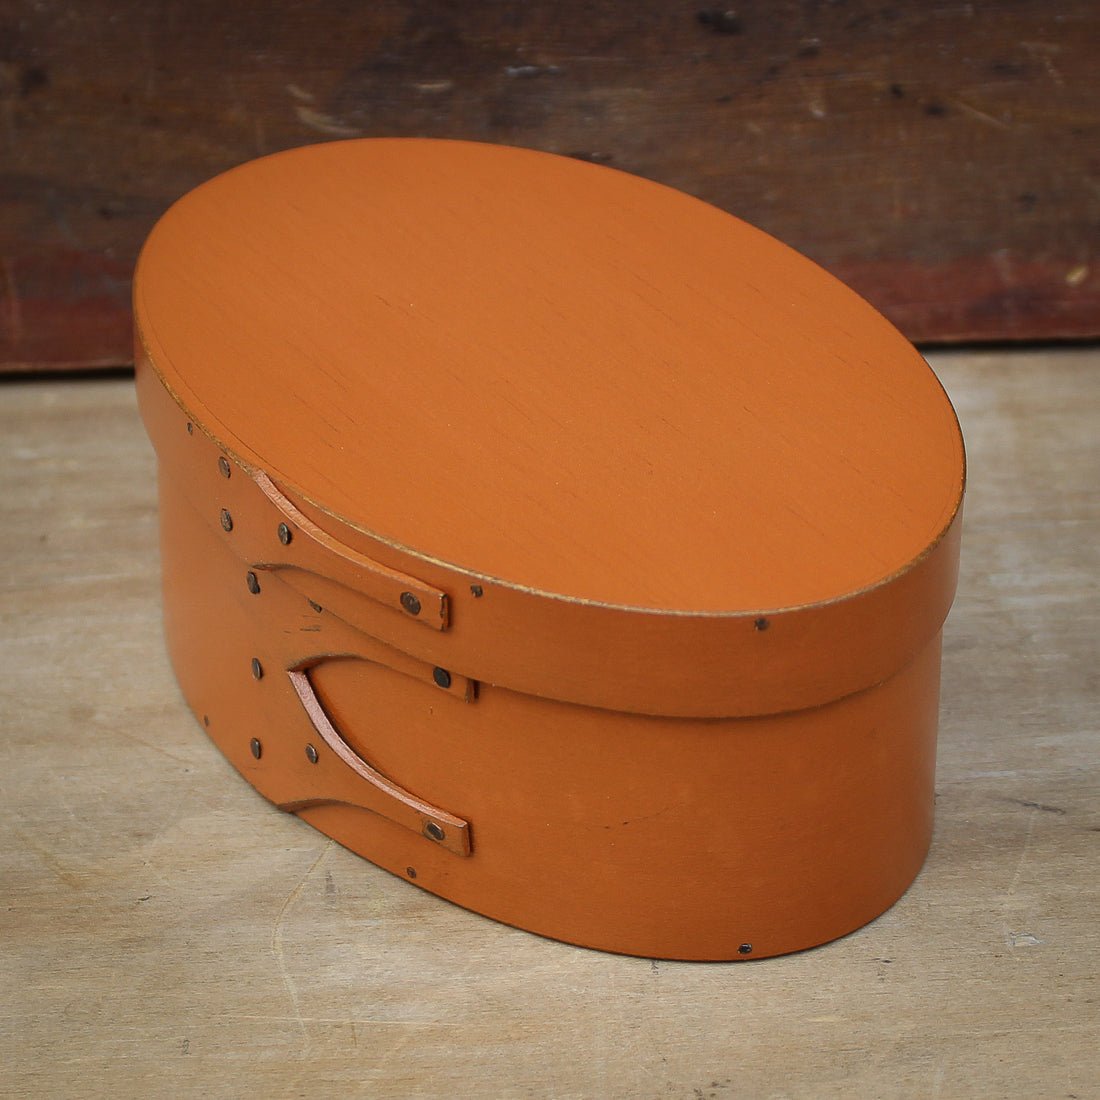 Shaker Oval Box, Size #2, LeHays Shaker Boxes, Handcrafted in Maine. Pumpkin Milk Paint Finish, Side View